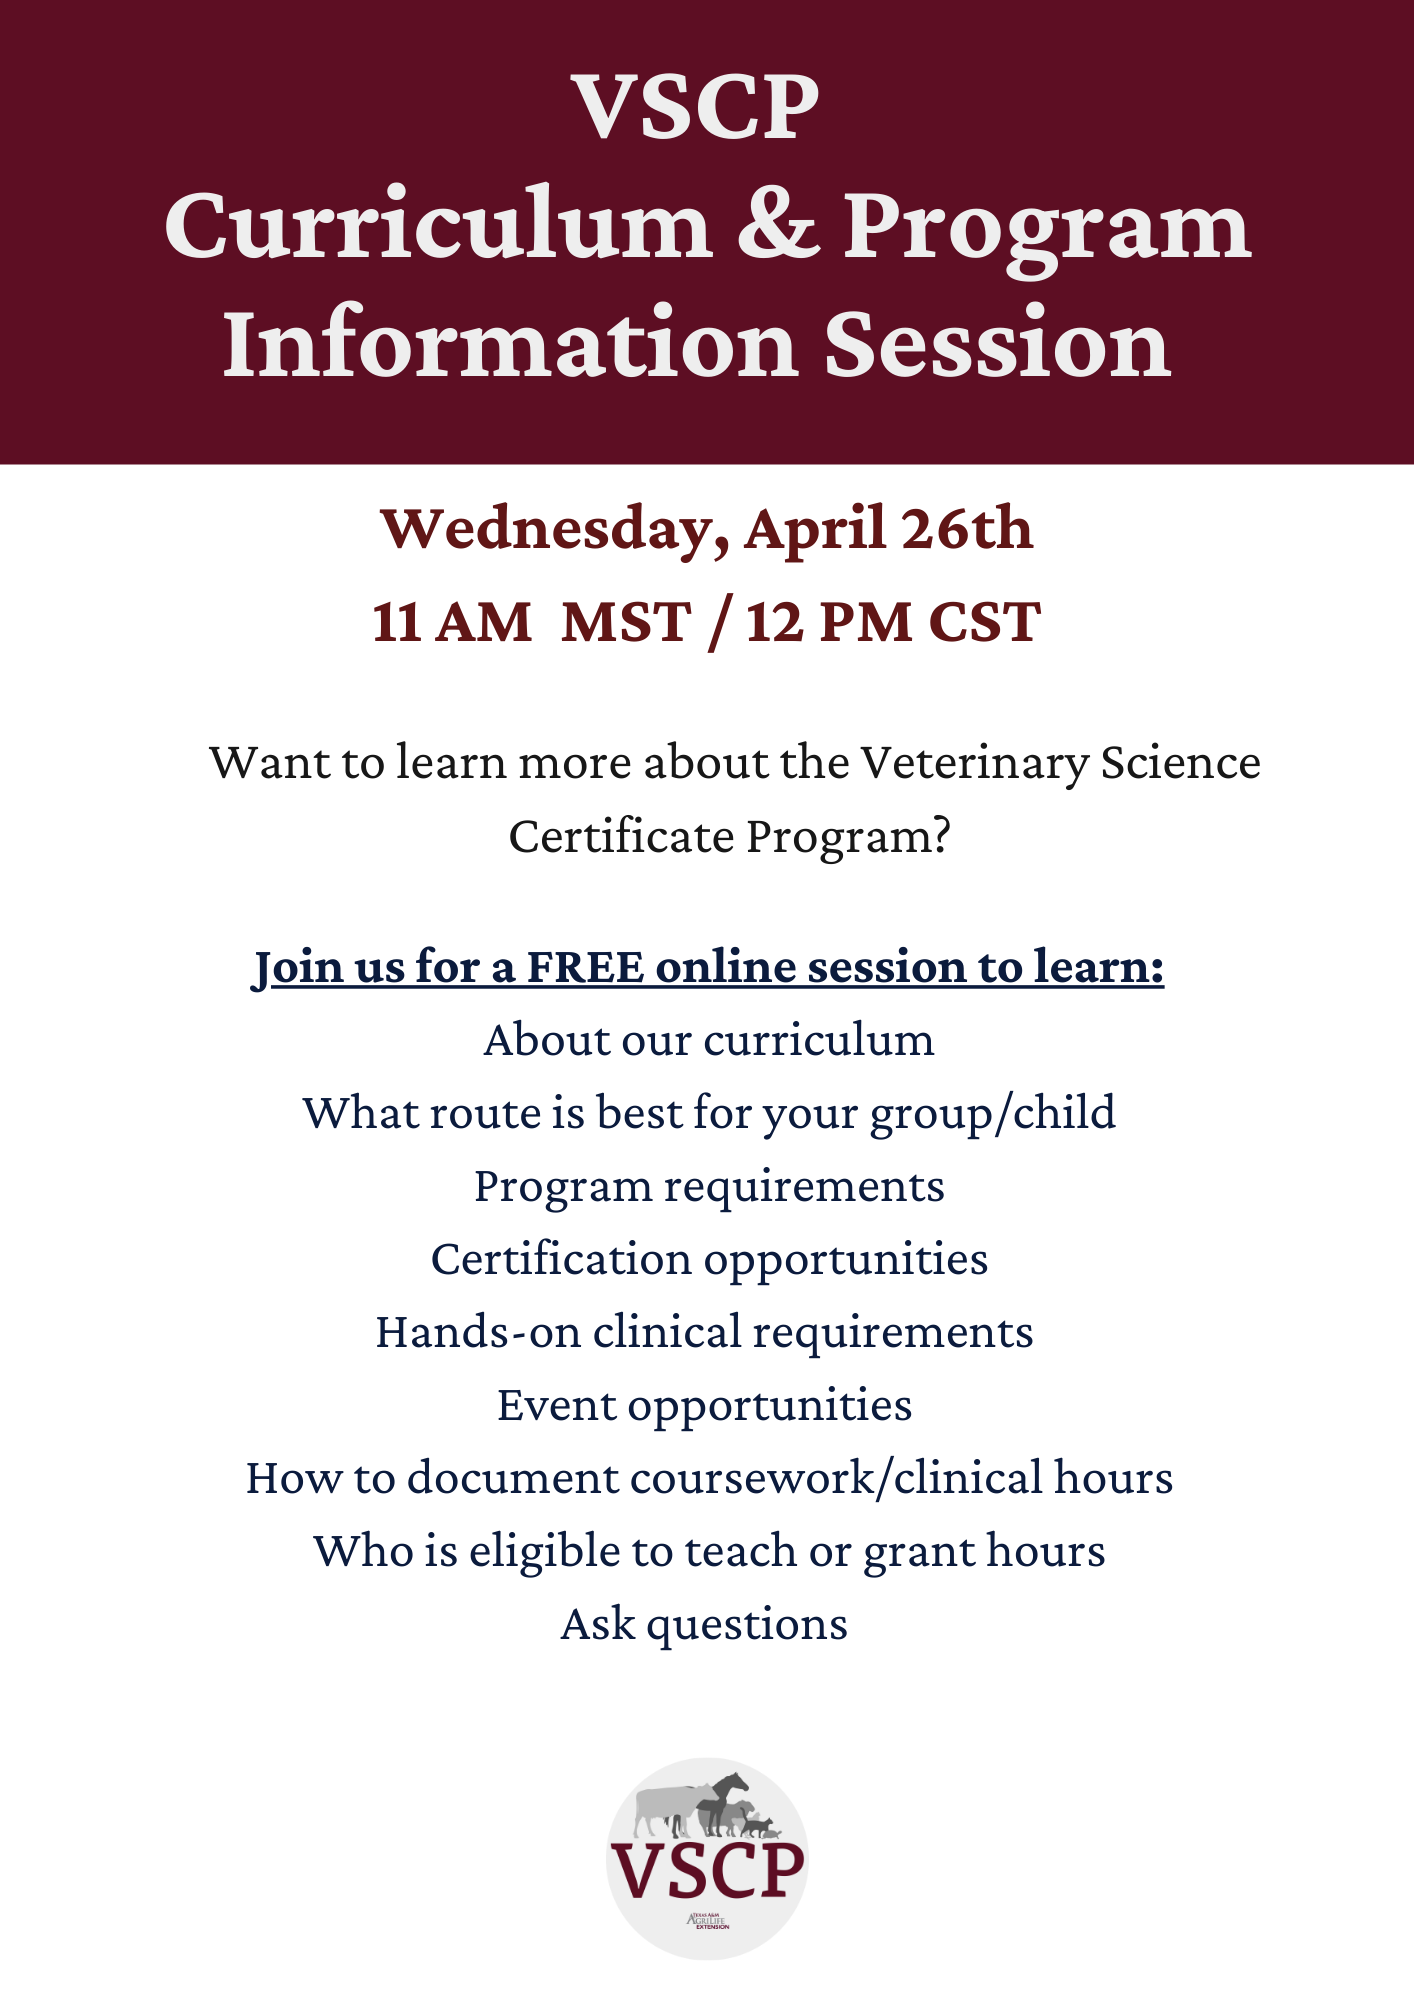 VSCP Curriculum Information Session Flyer (5)